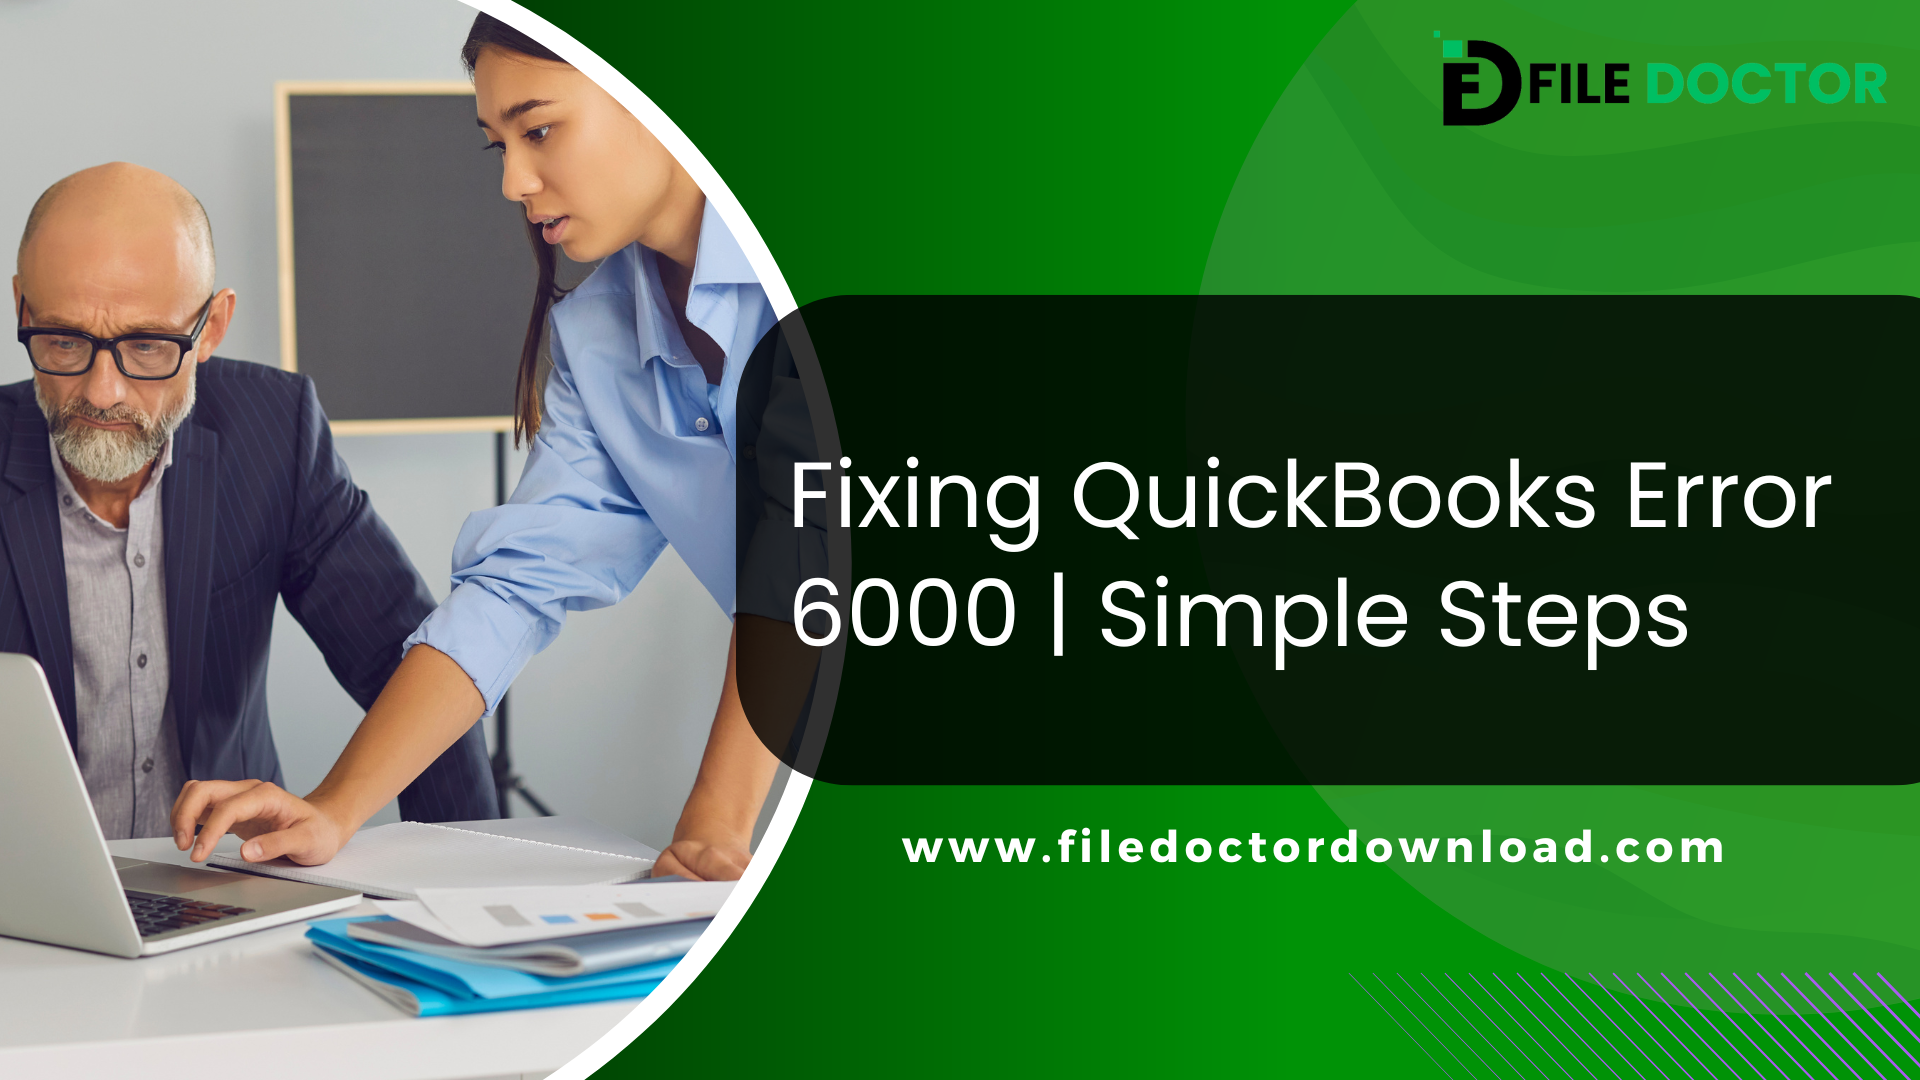 Fixing QuickBooks Error 6000 | Simple Steps to Resolve Company File Issues